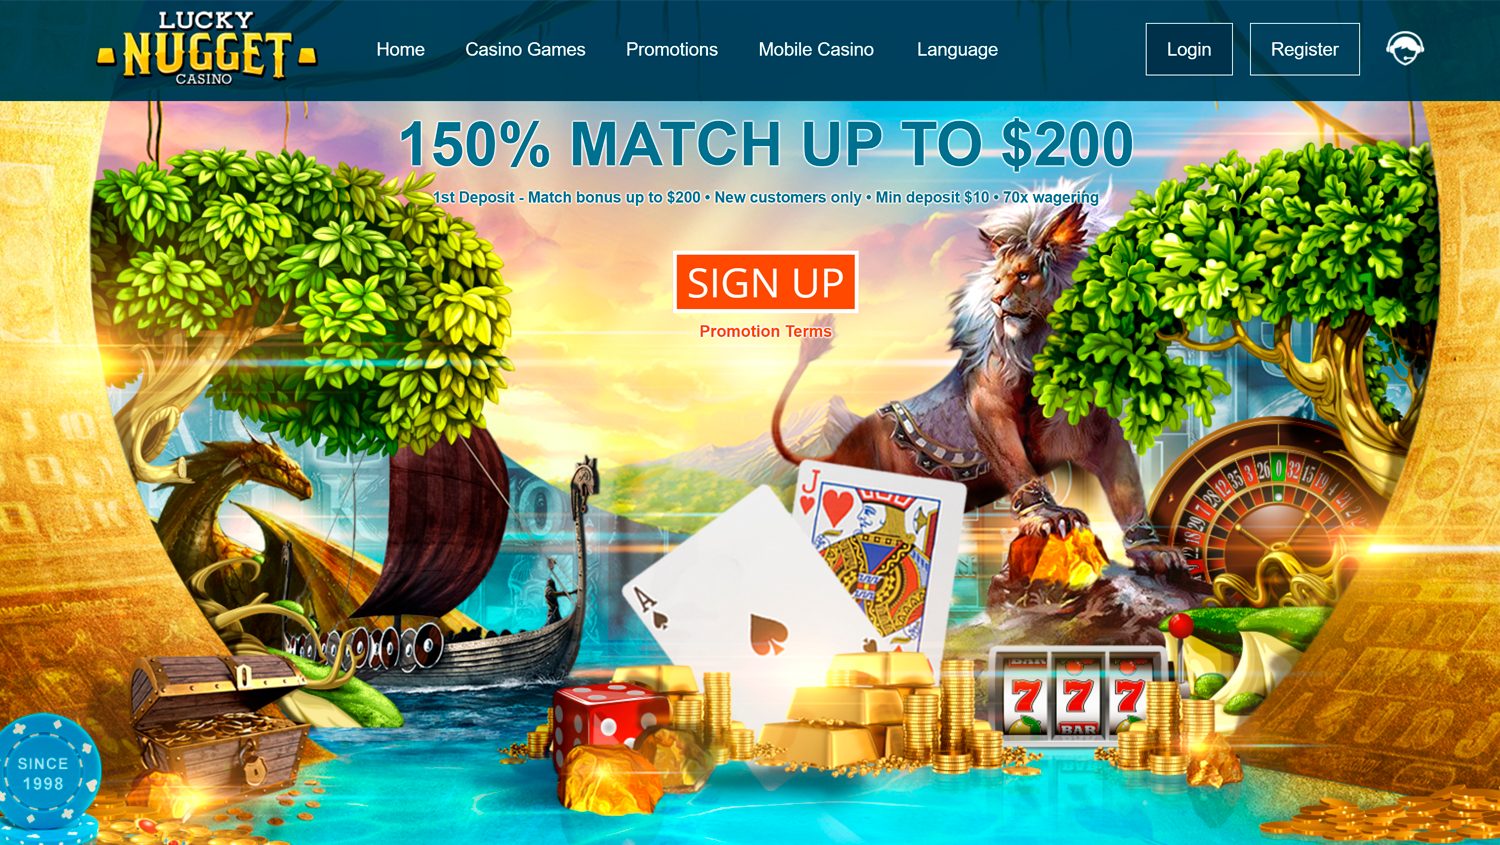 Main page on Lucky Nugget Casino site